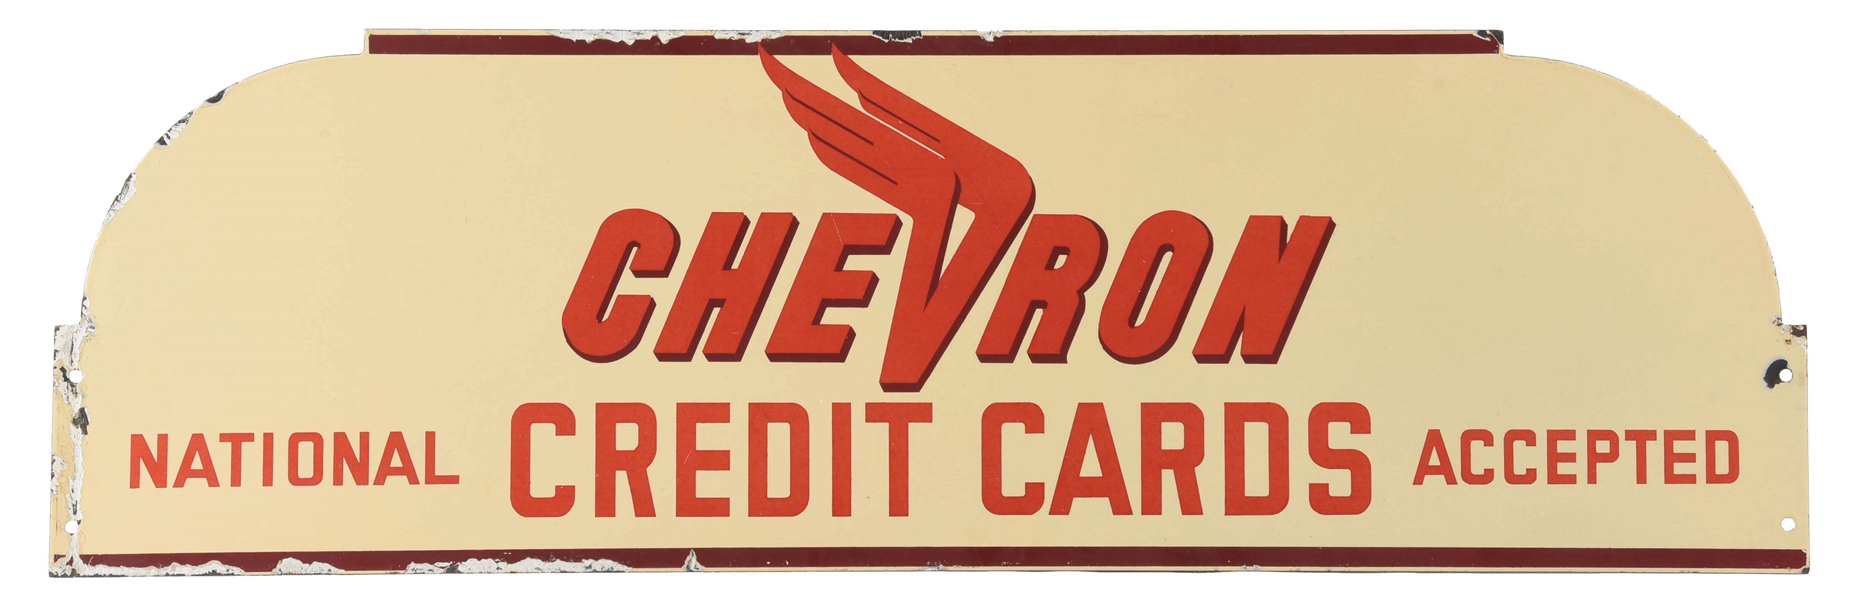 CHEVRON CREDIT CARDS ACCEPTED PORCELAIN SERVICE STATION SIGN.